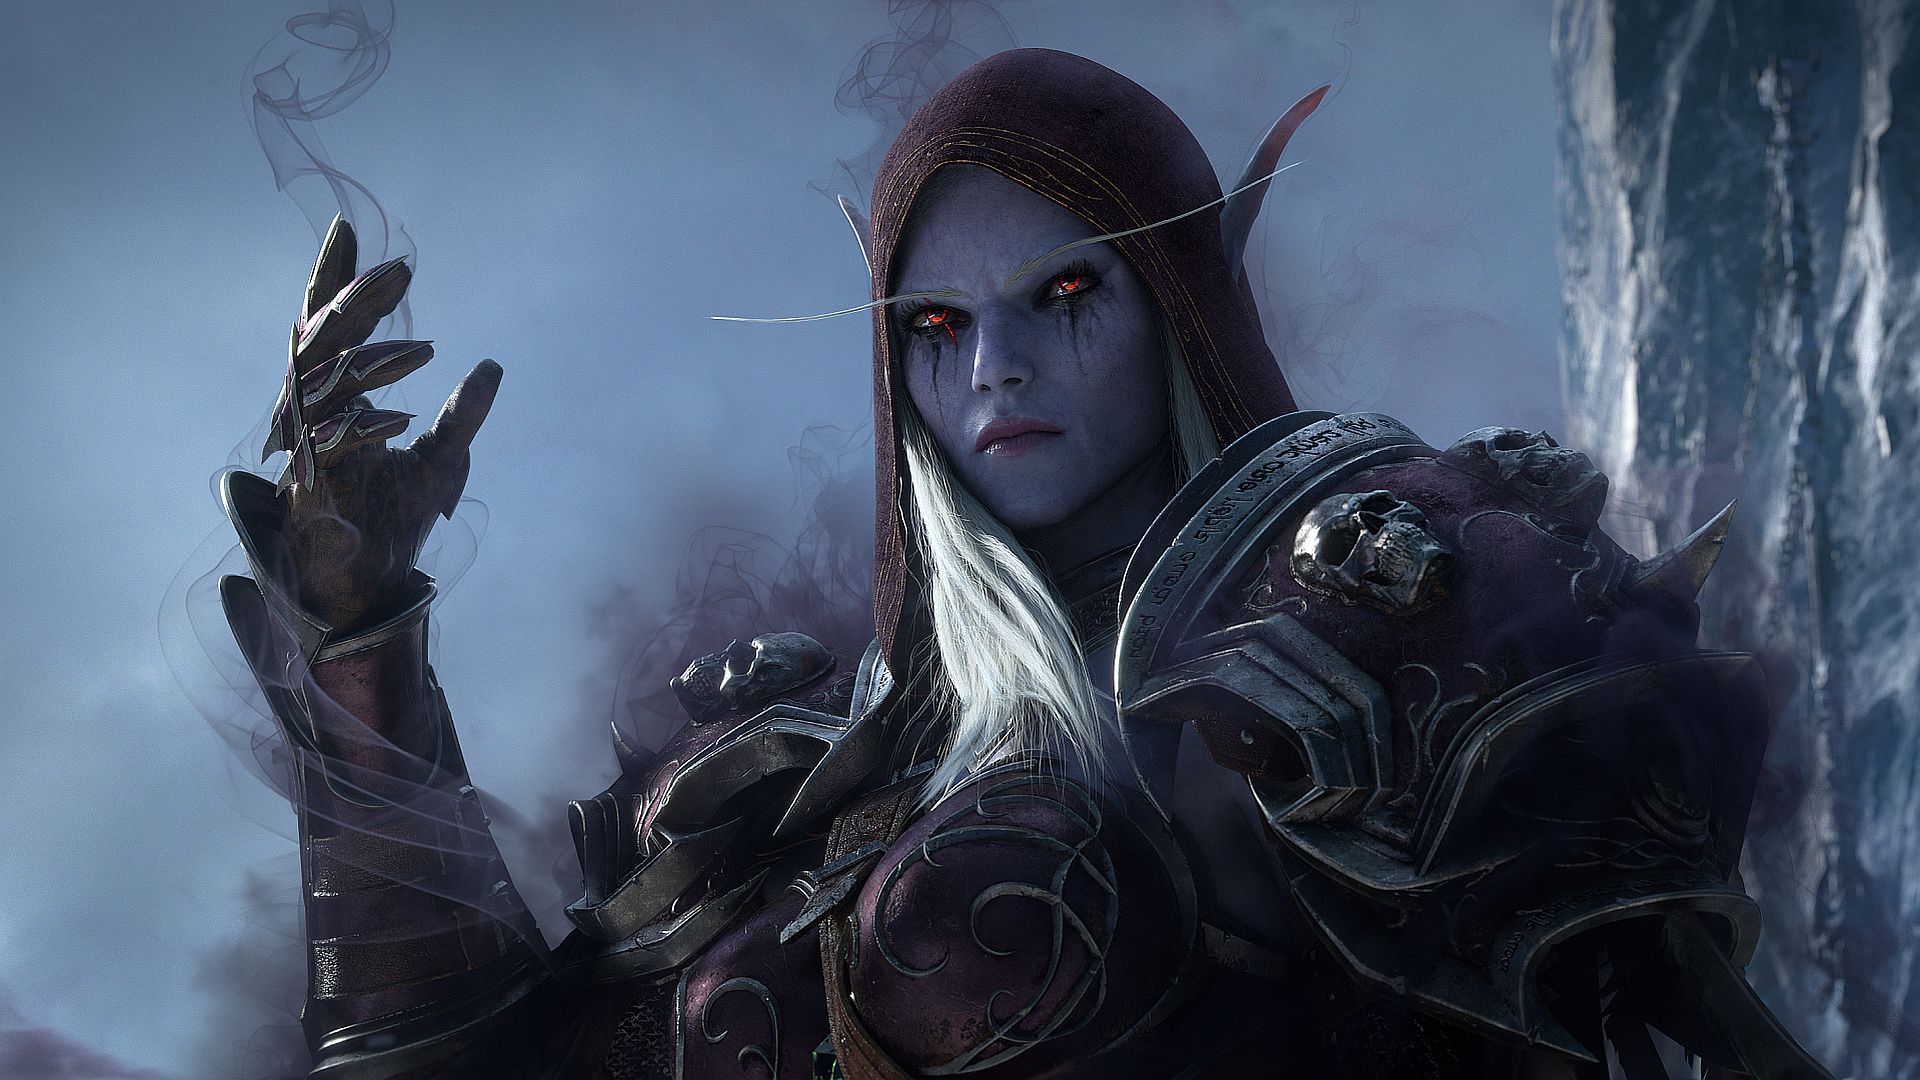 This Skyrim Mod Lets You Play As World Of Warcraft’s Sylvanas